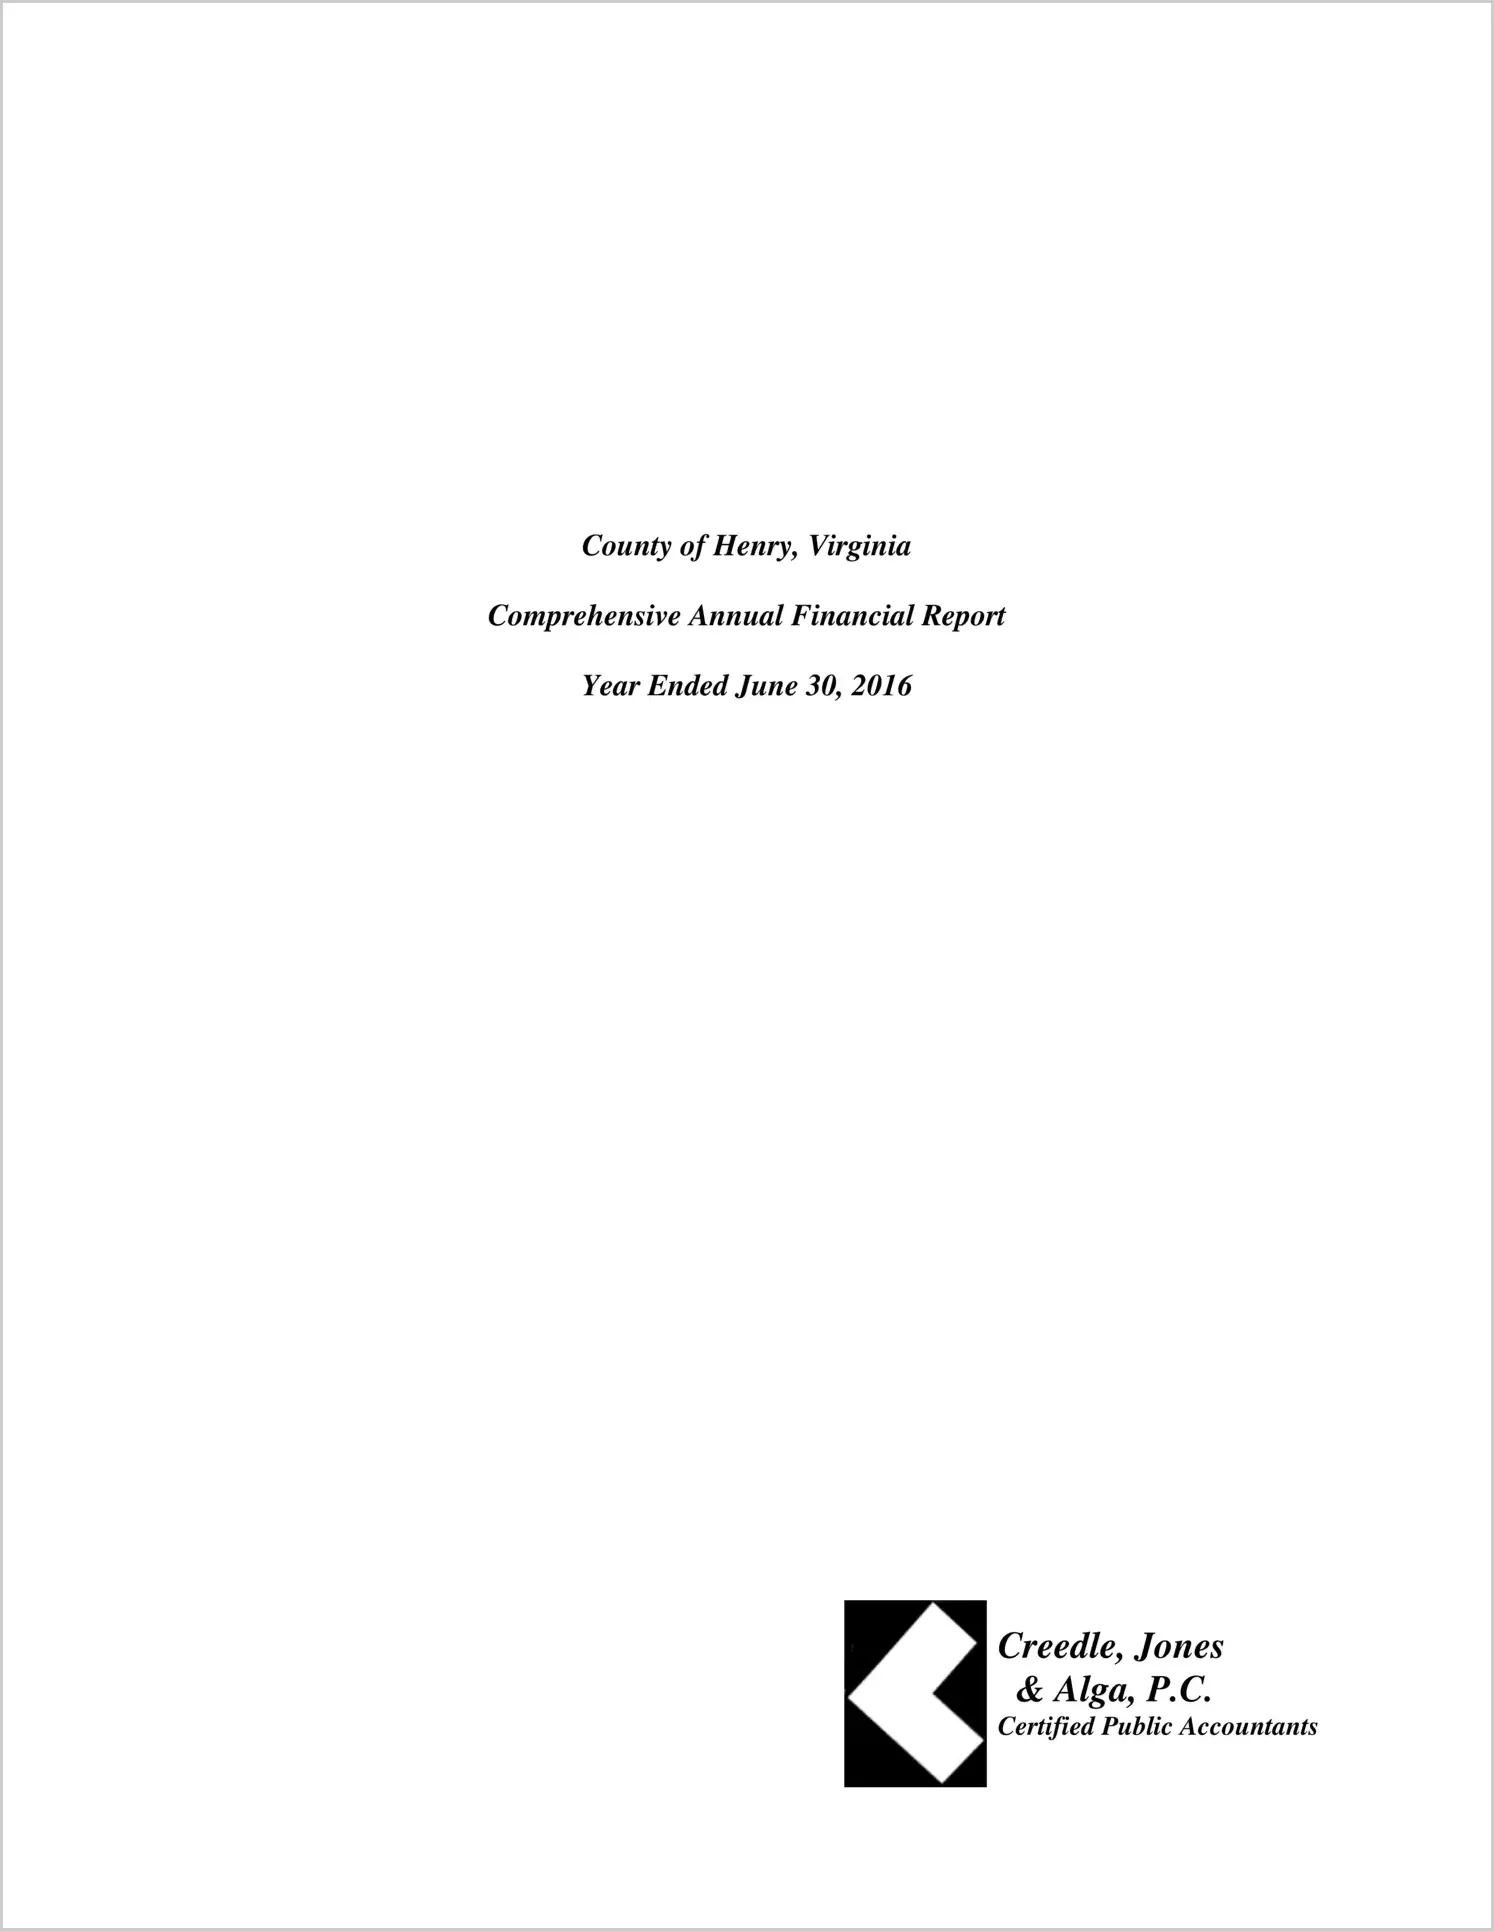 2016 Annual Financial Report for County of Henry